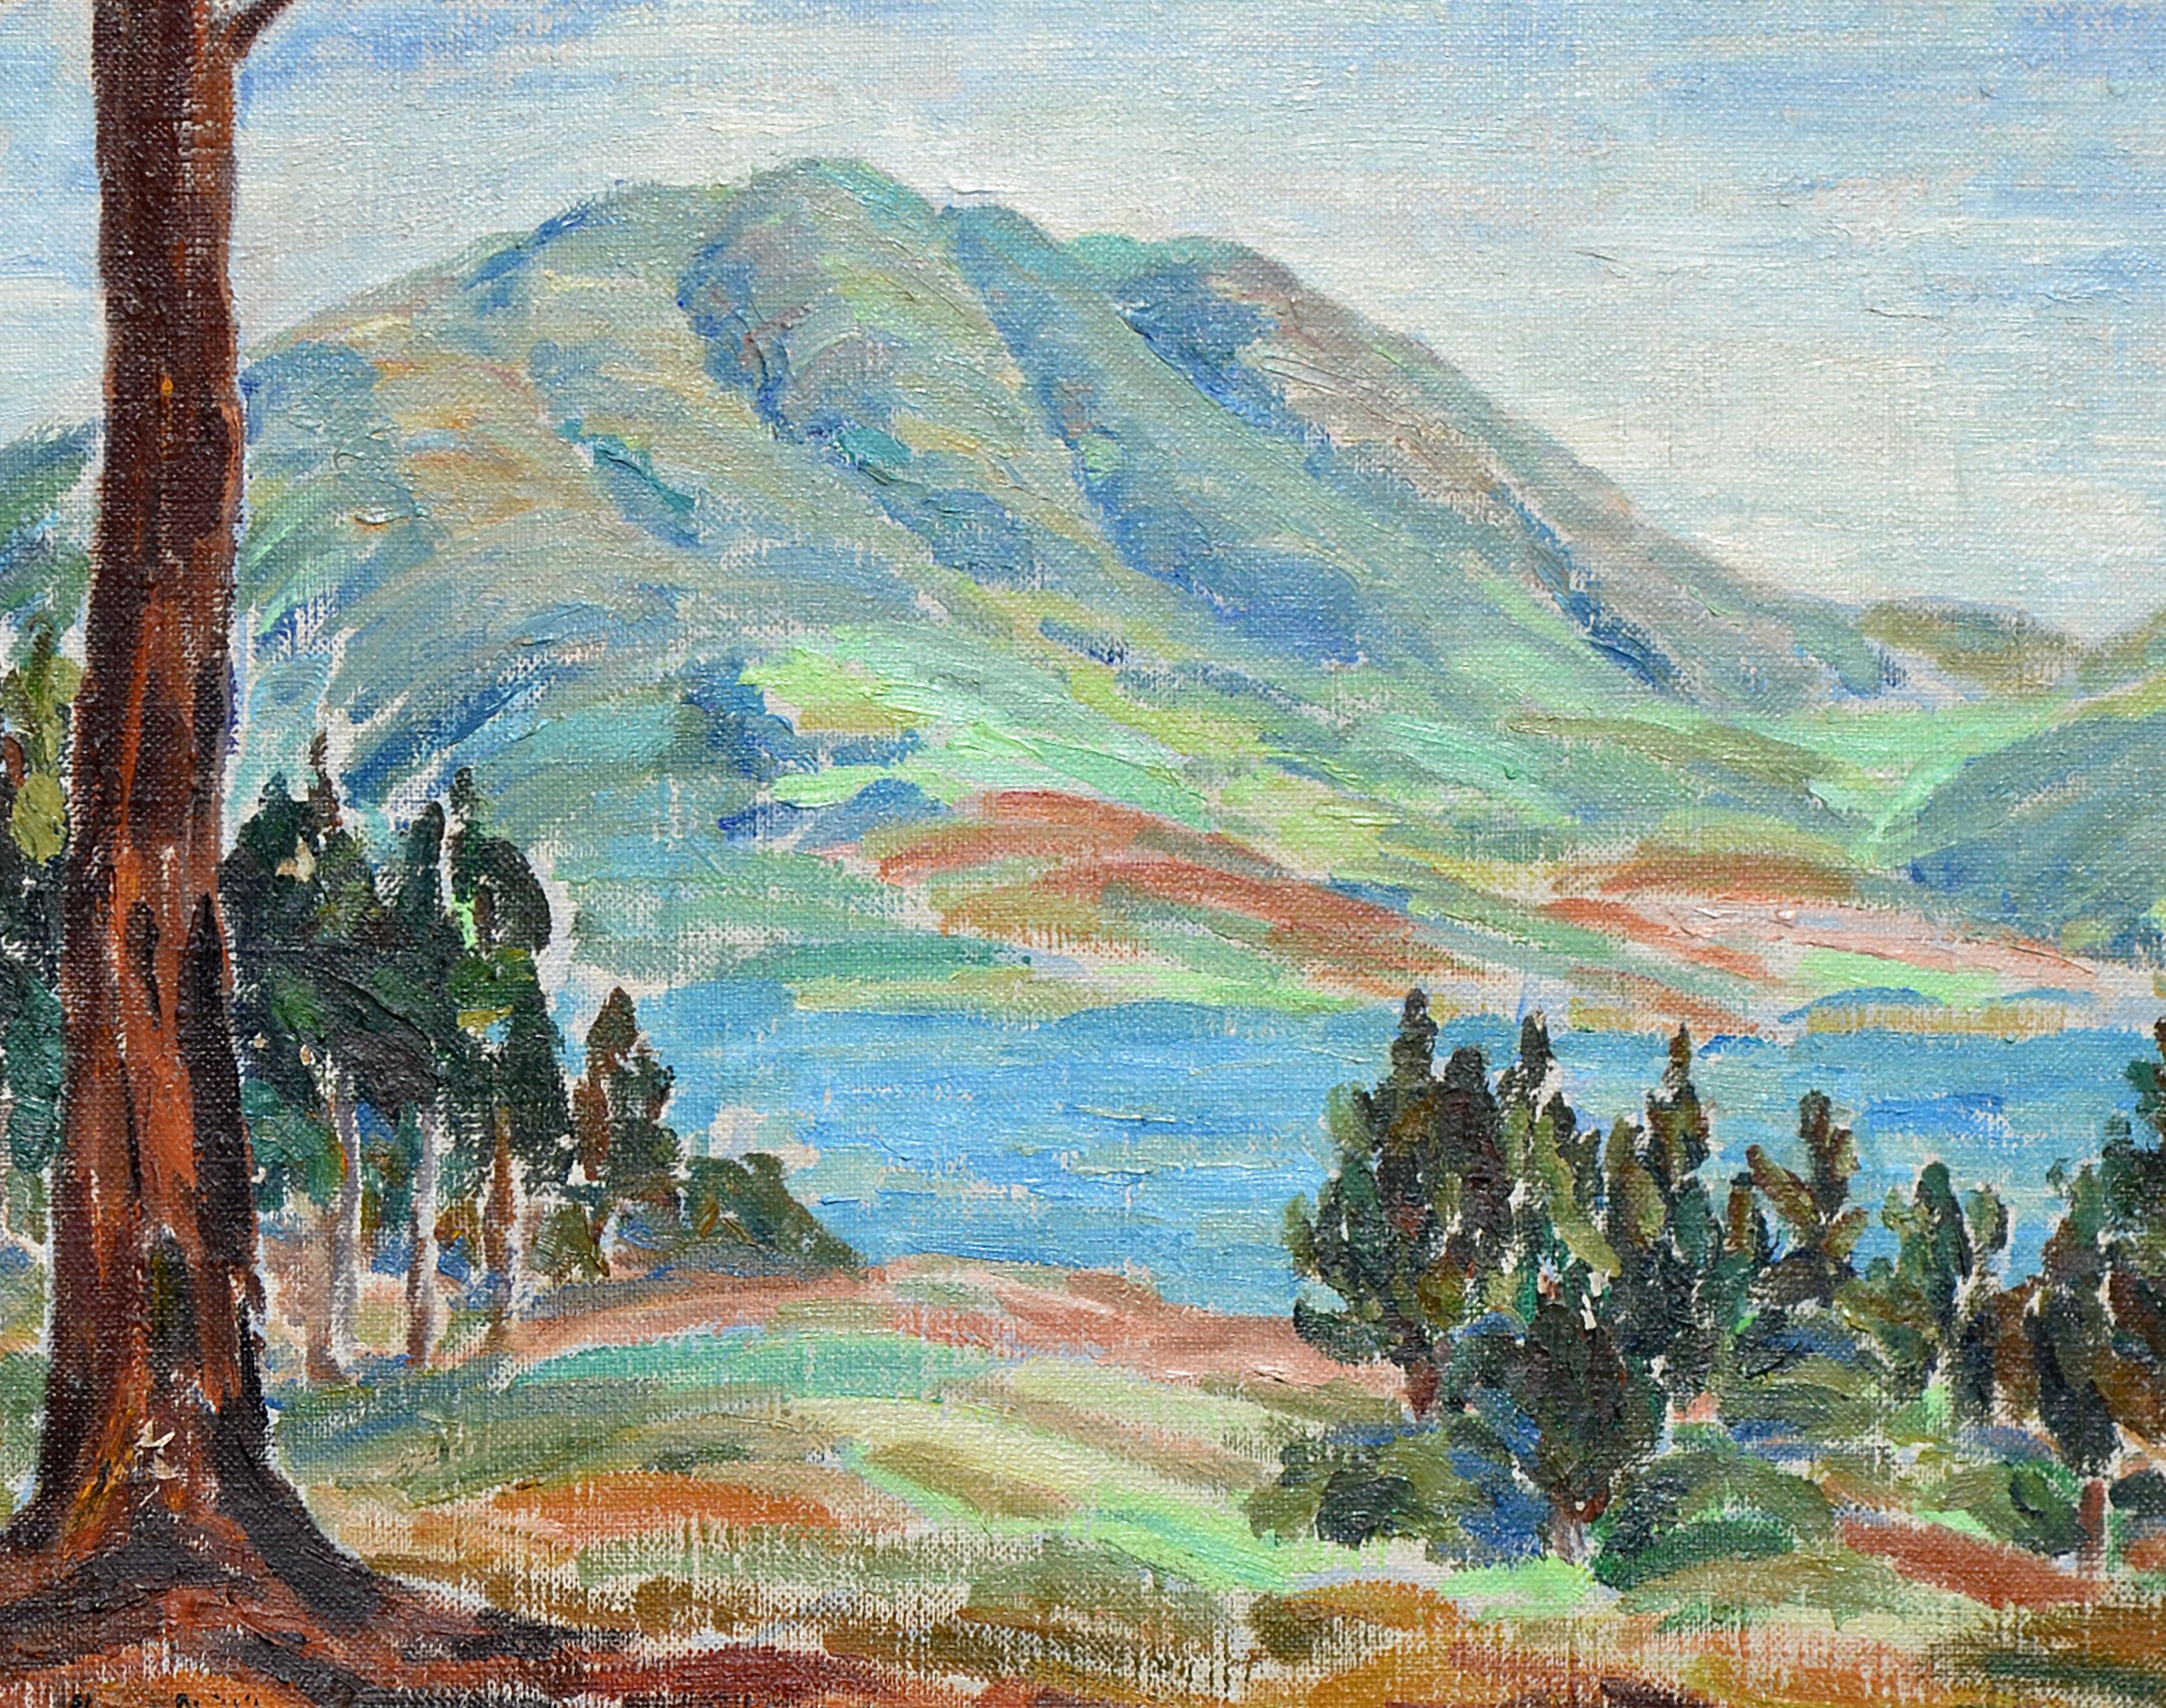 Tomales Bay Landscape - Painting by Caroline Dorothea (Dolly) Phillips